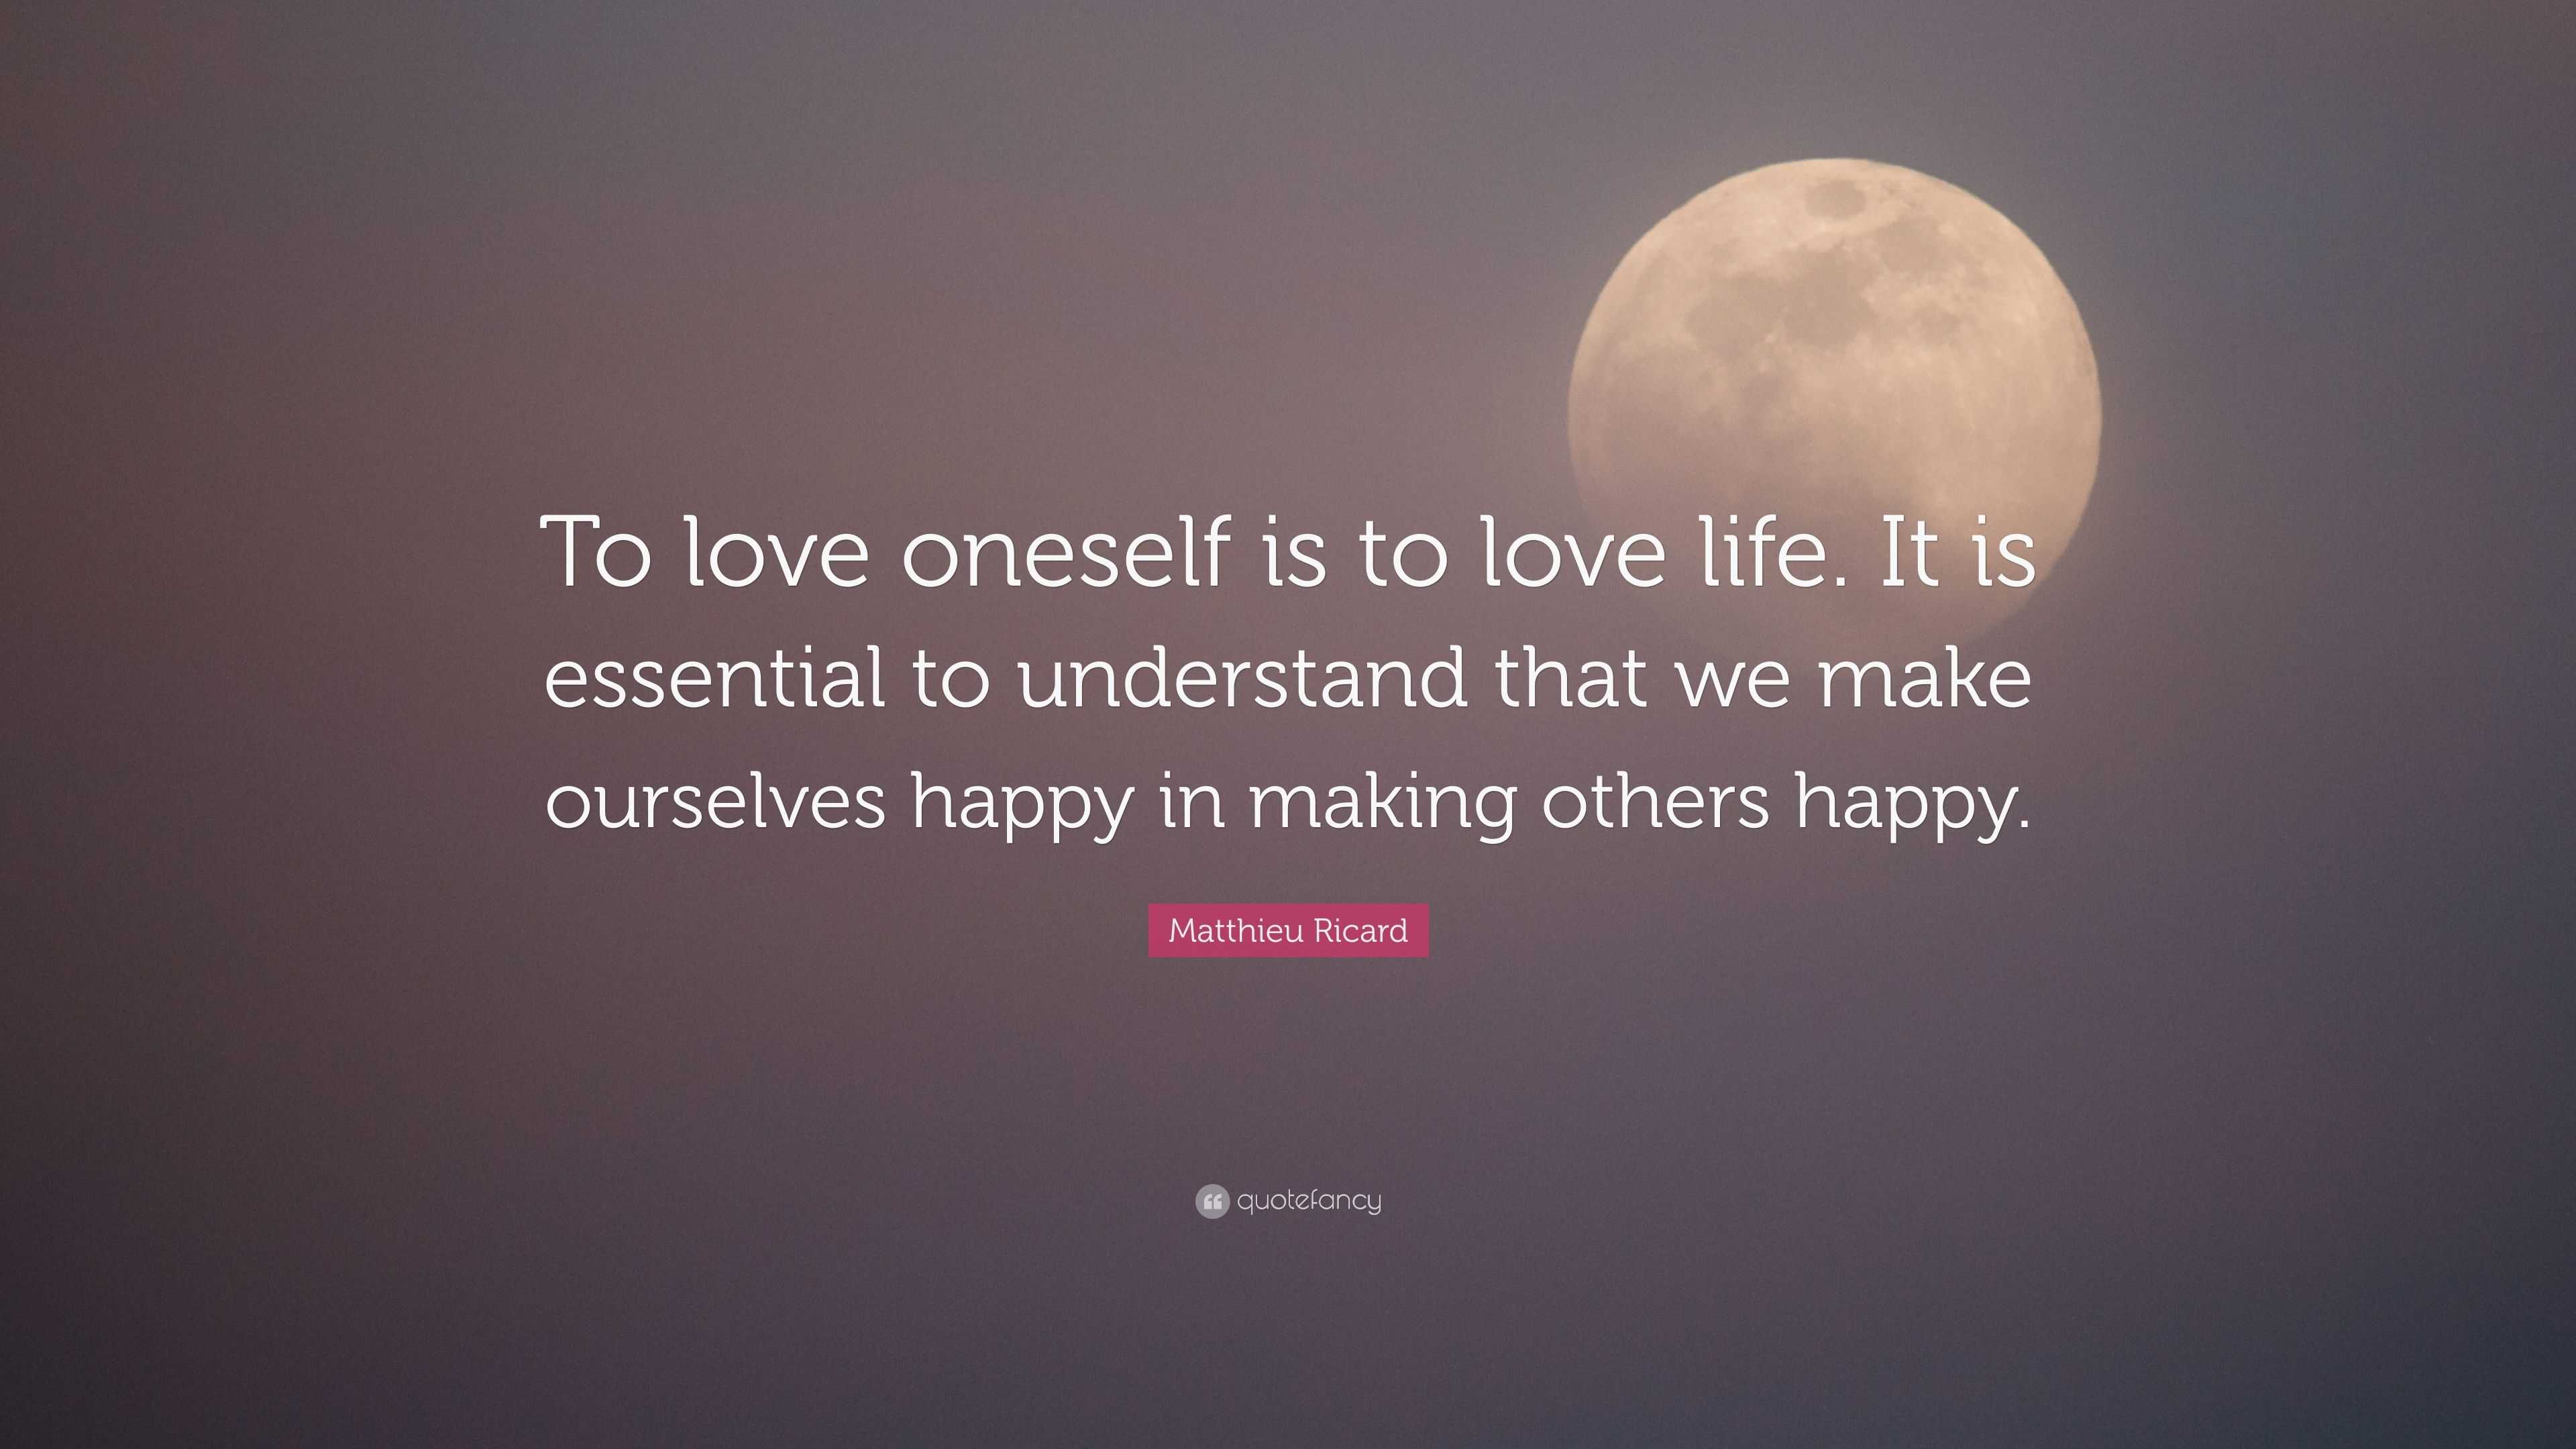 Matthieu Ricard Quote: “To love oneself is to love life. It is ...